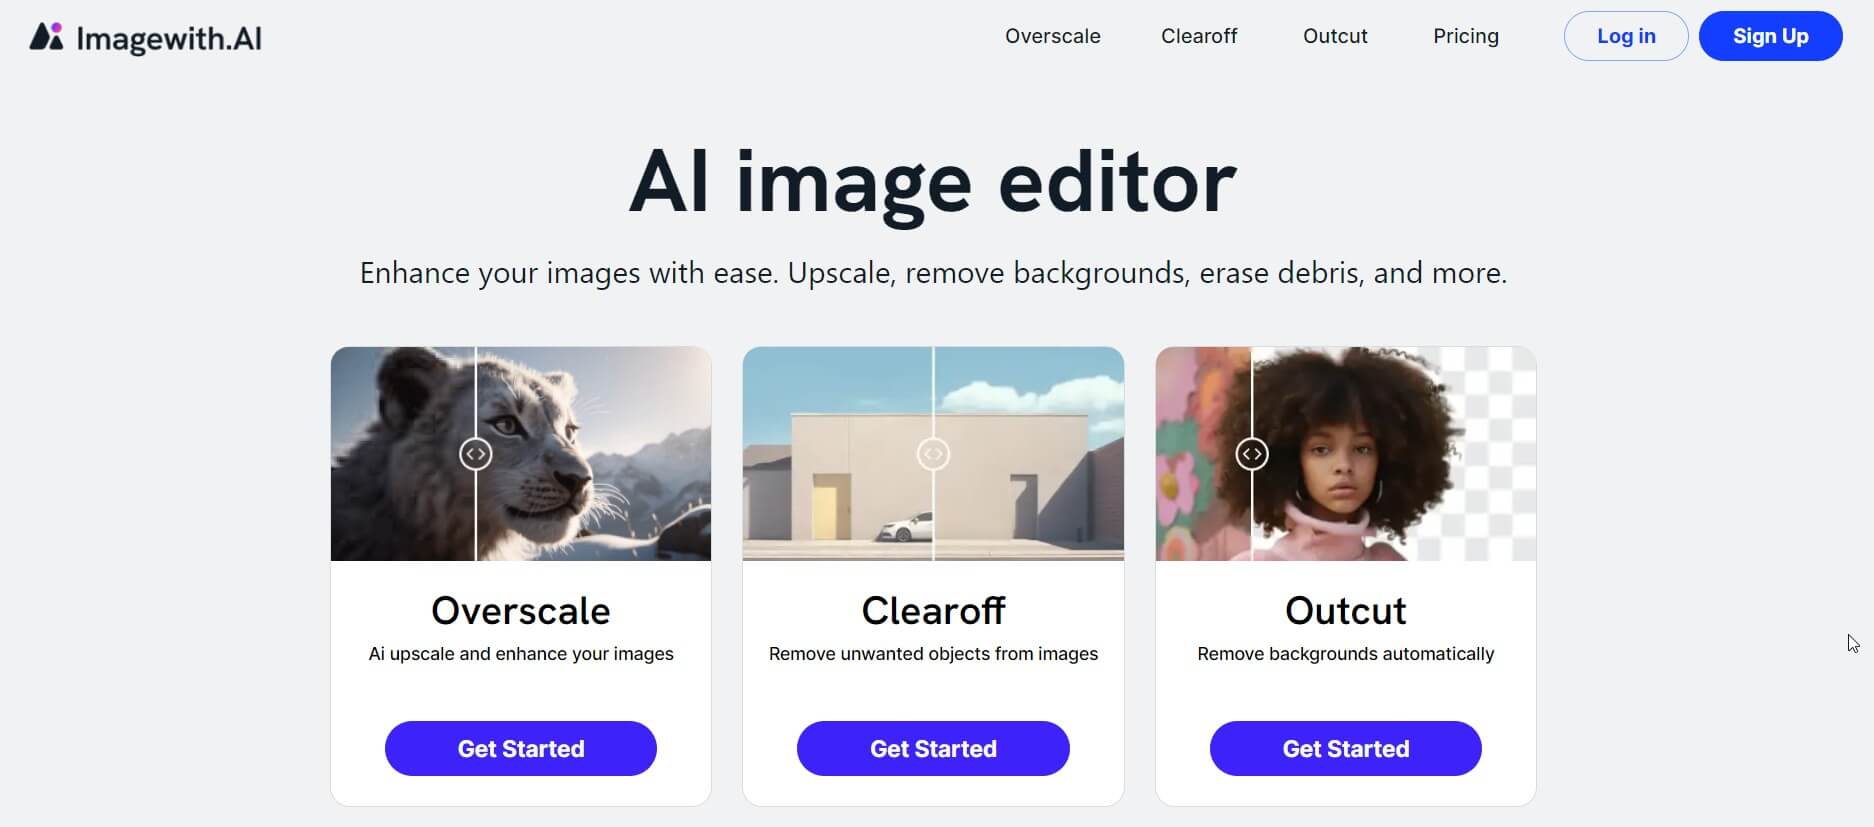 Imagewith.ai- photo editing tool with its intuitive design and advanced AI capabilities 